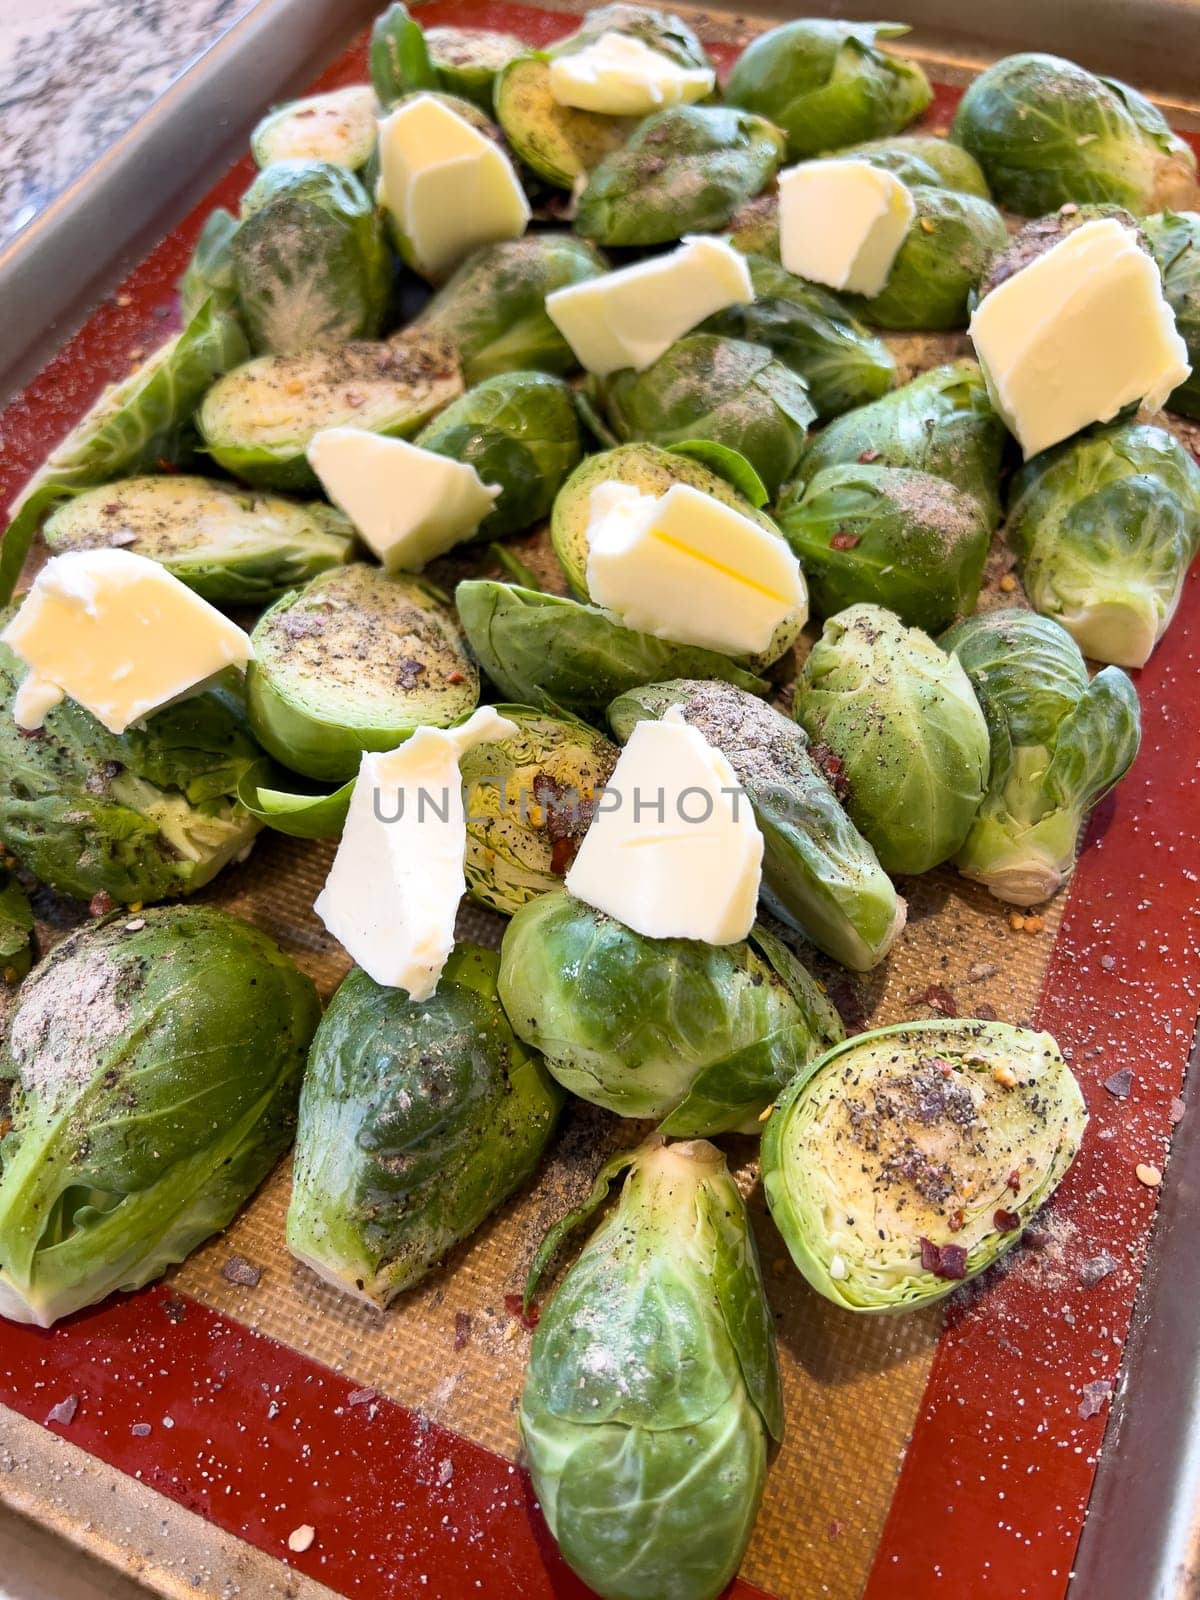 A tray of whole Brussels sprouts is generously topped with butter pats and seasoned, set against a non-stick baking sheet, indicating preparation for a savory roast.